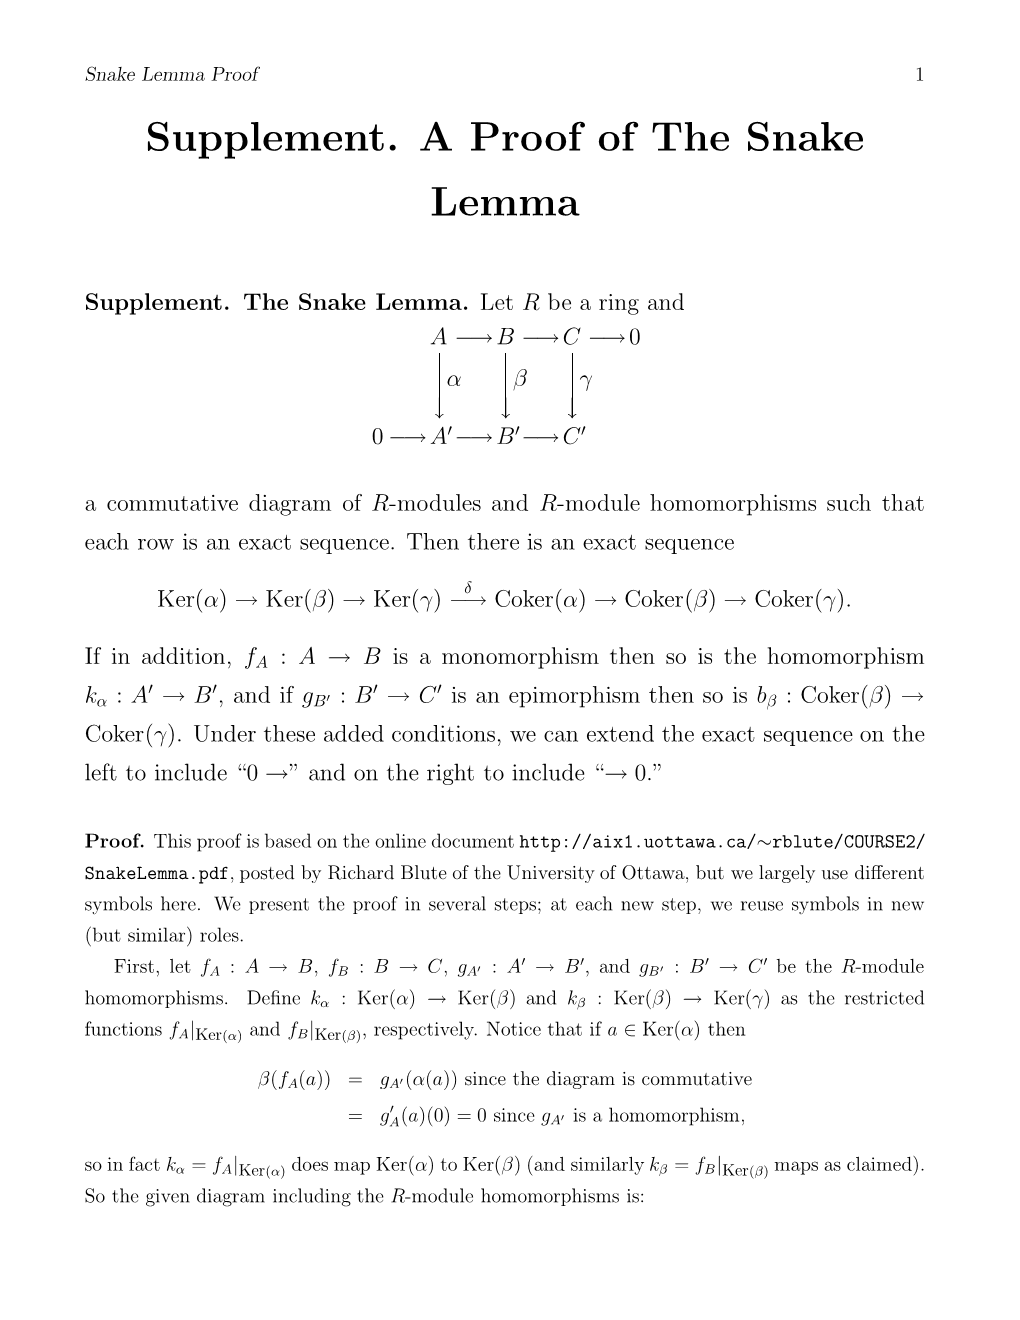 Supplement. a Proof of the Snake Lemma